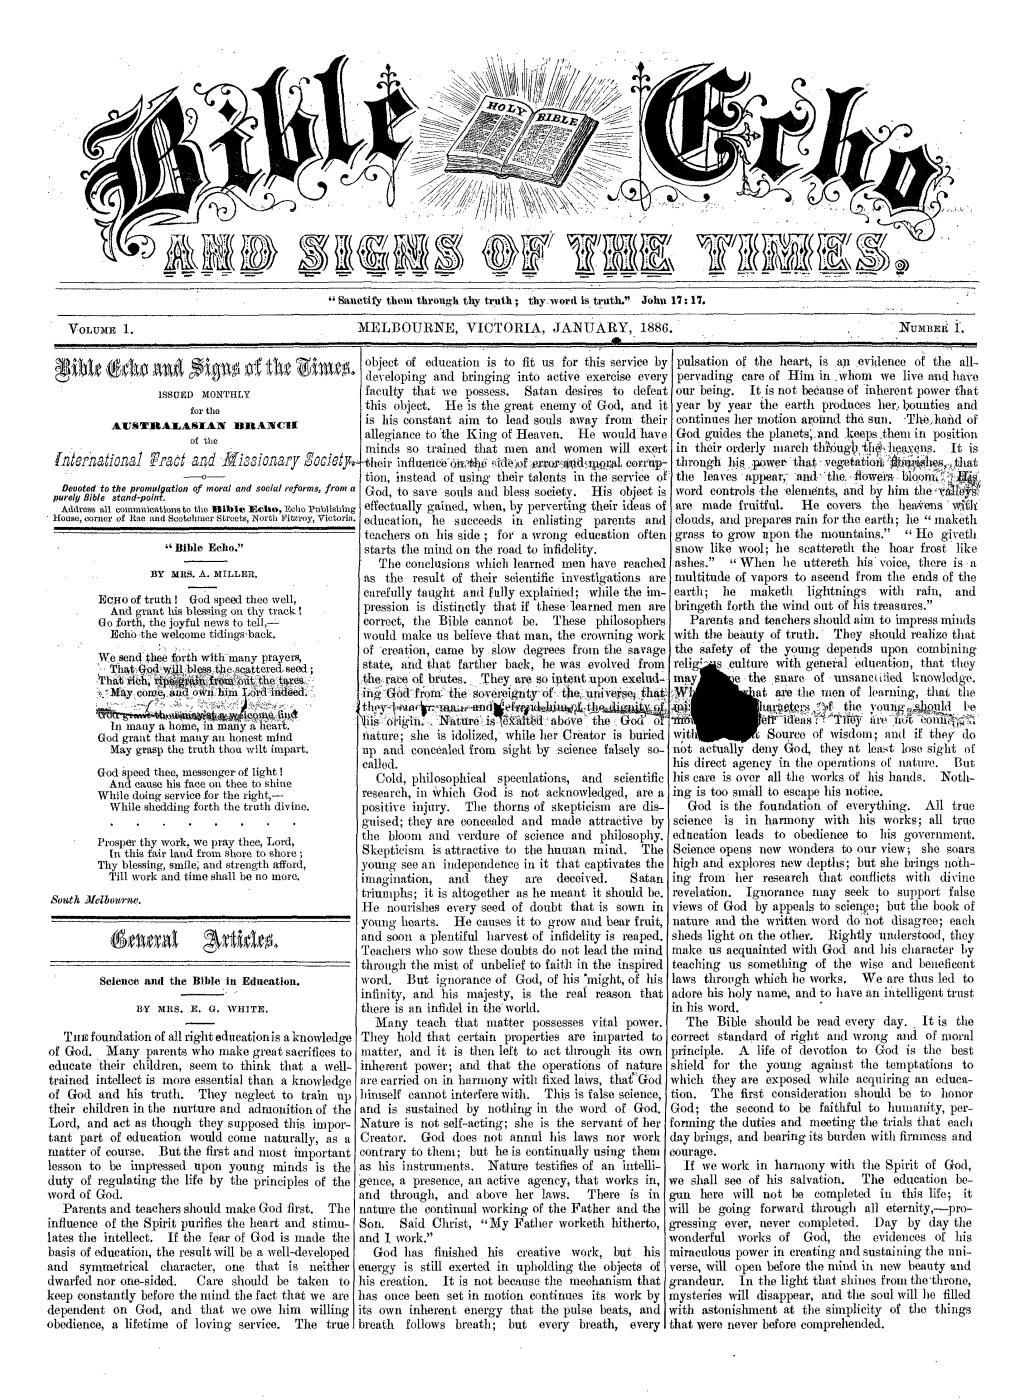 Bible Echo and Signs of the Times for 1886